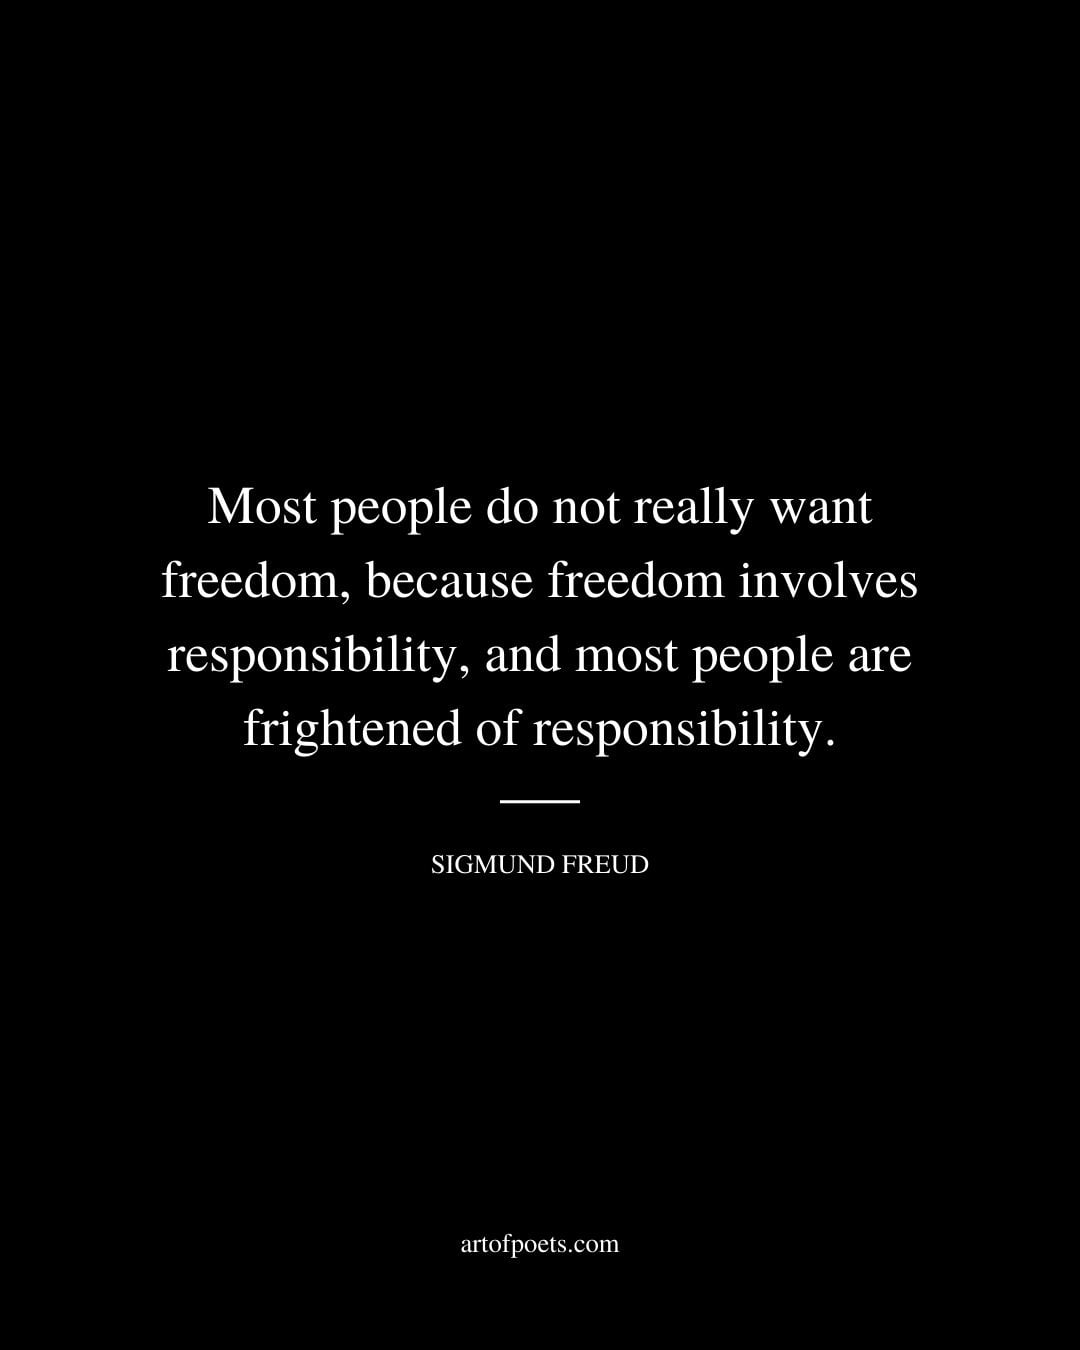 Most people do not really want freedom because freedom involves responsibility and most people are frightened of responsibility